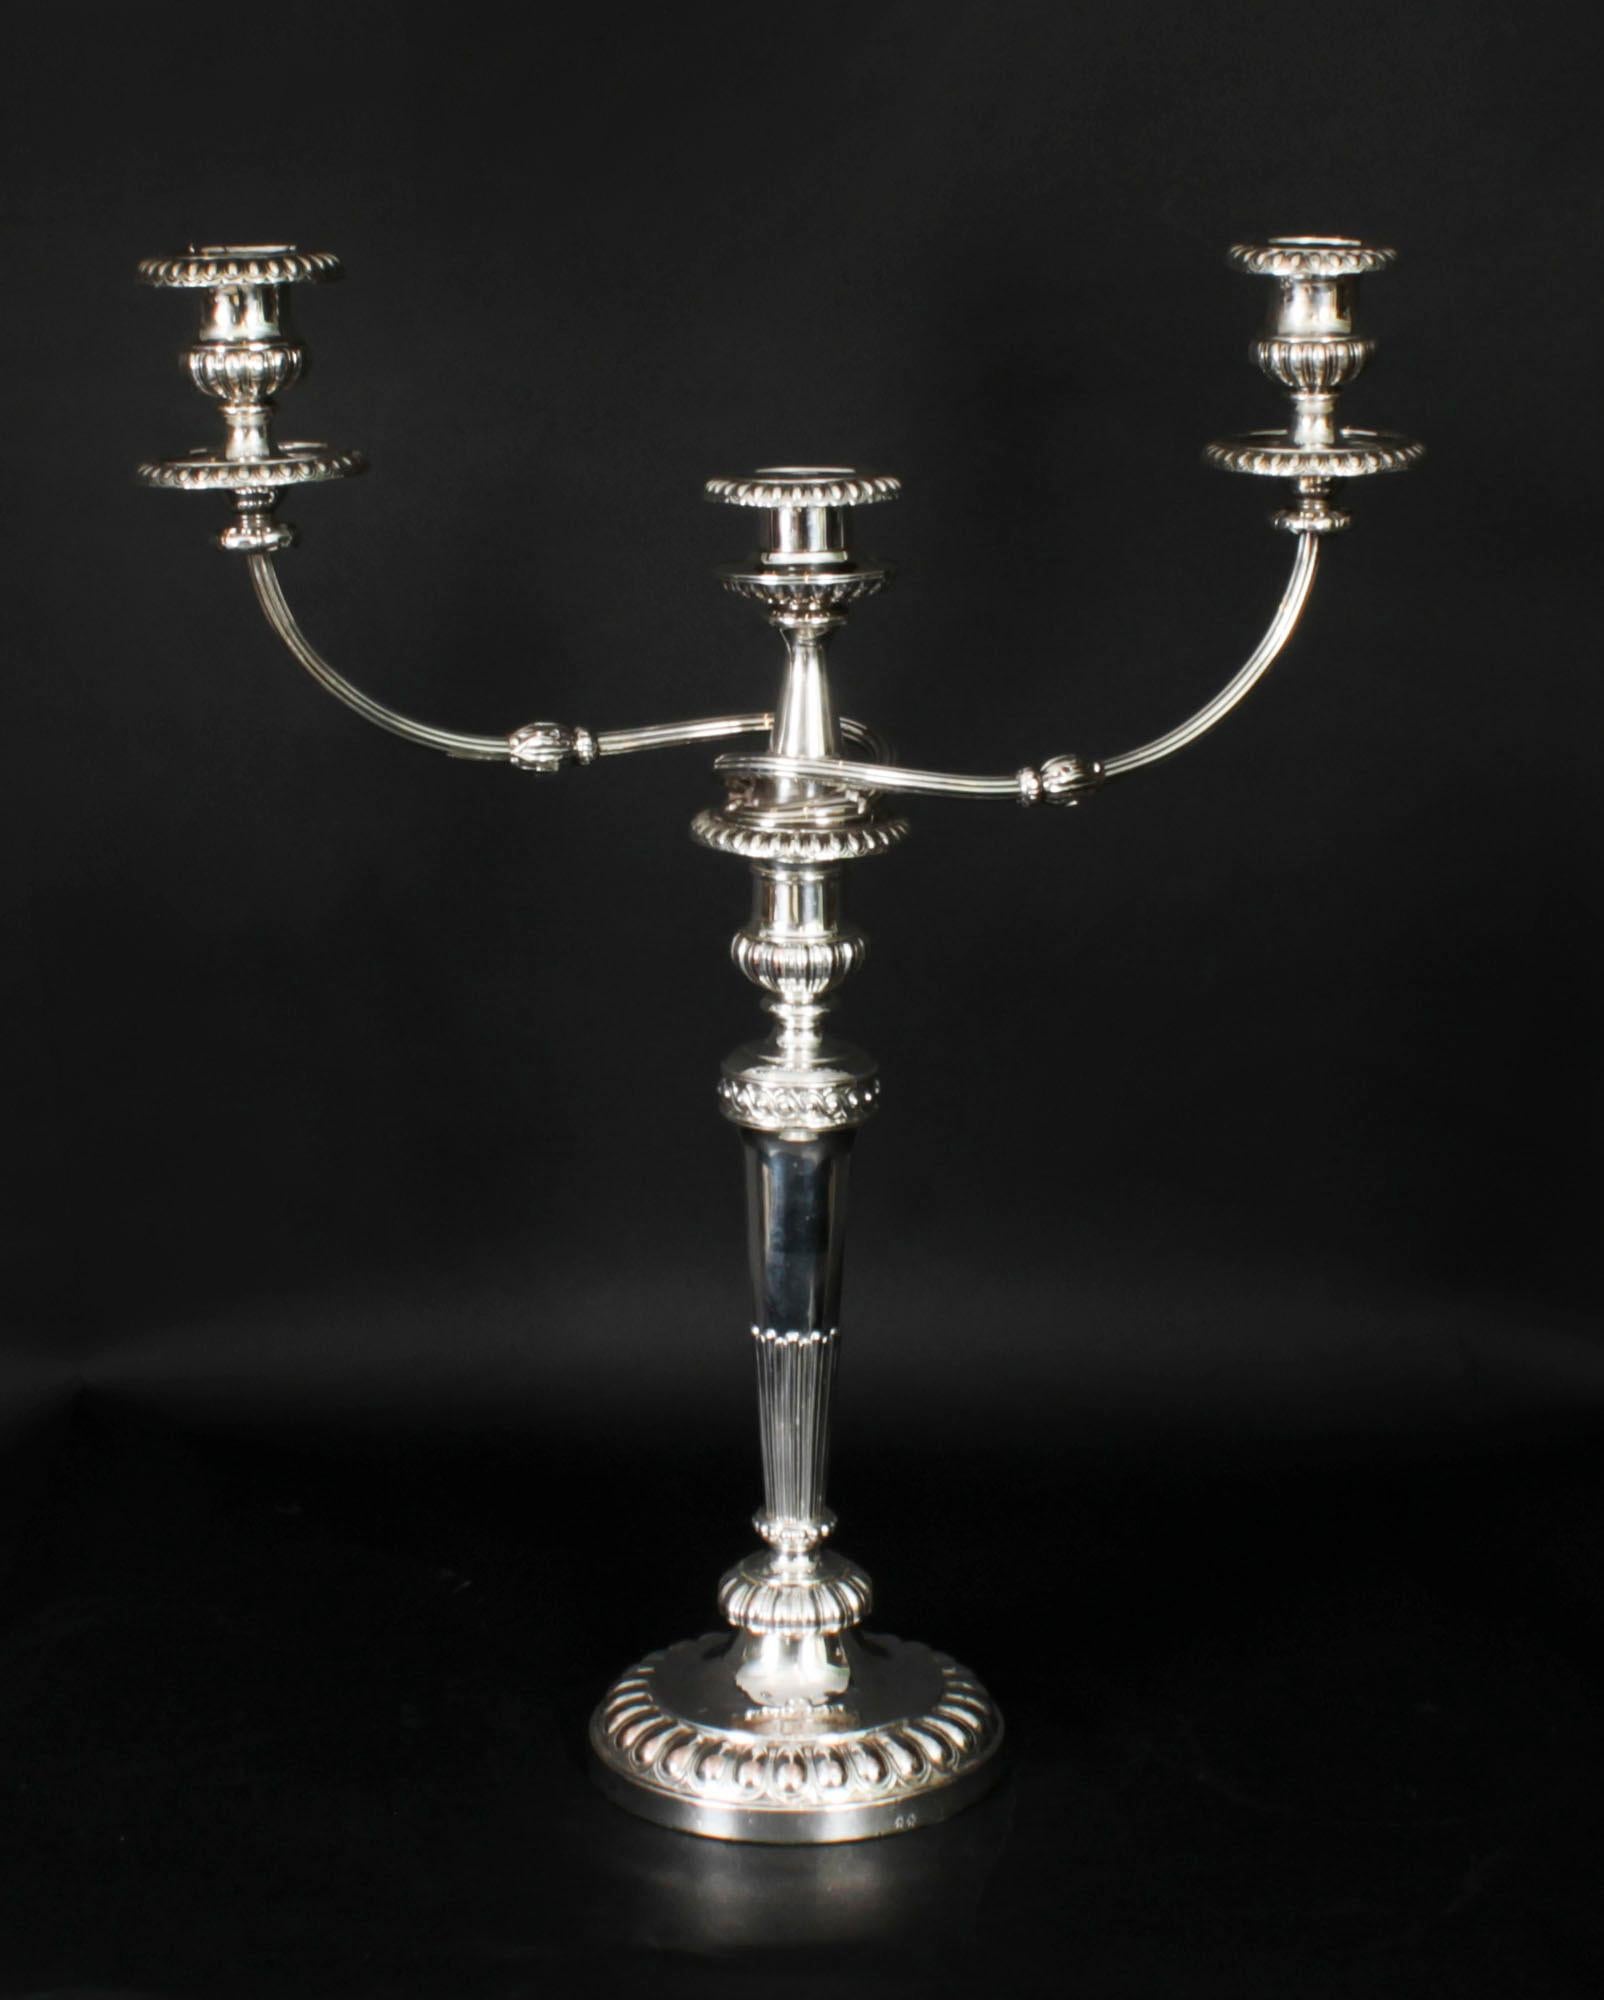 This is a stunning monumental pair of antique English Old Sheffield silver on copper, three light, two-branch table candelabra, circa 1790 in date, and bearing the sunburst makers marks of the world renowned silversmith Matthew Boulton.

The